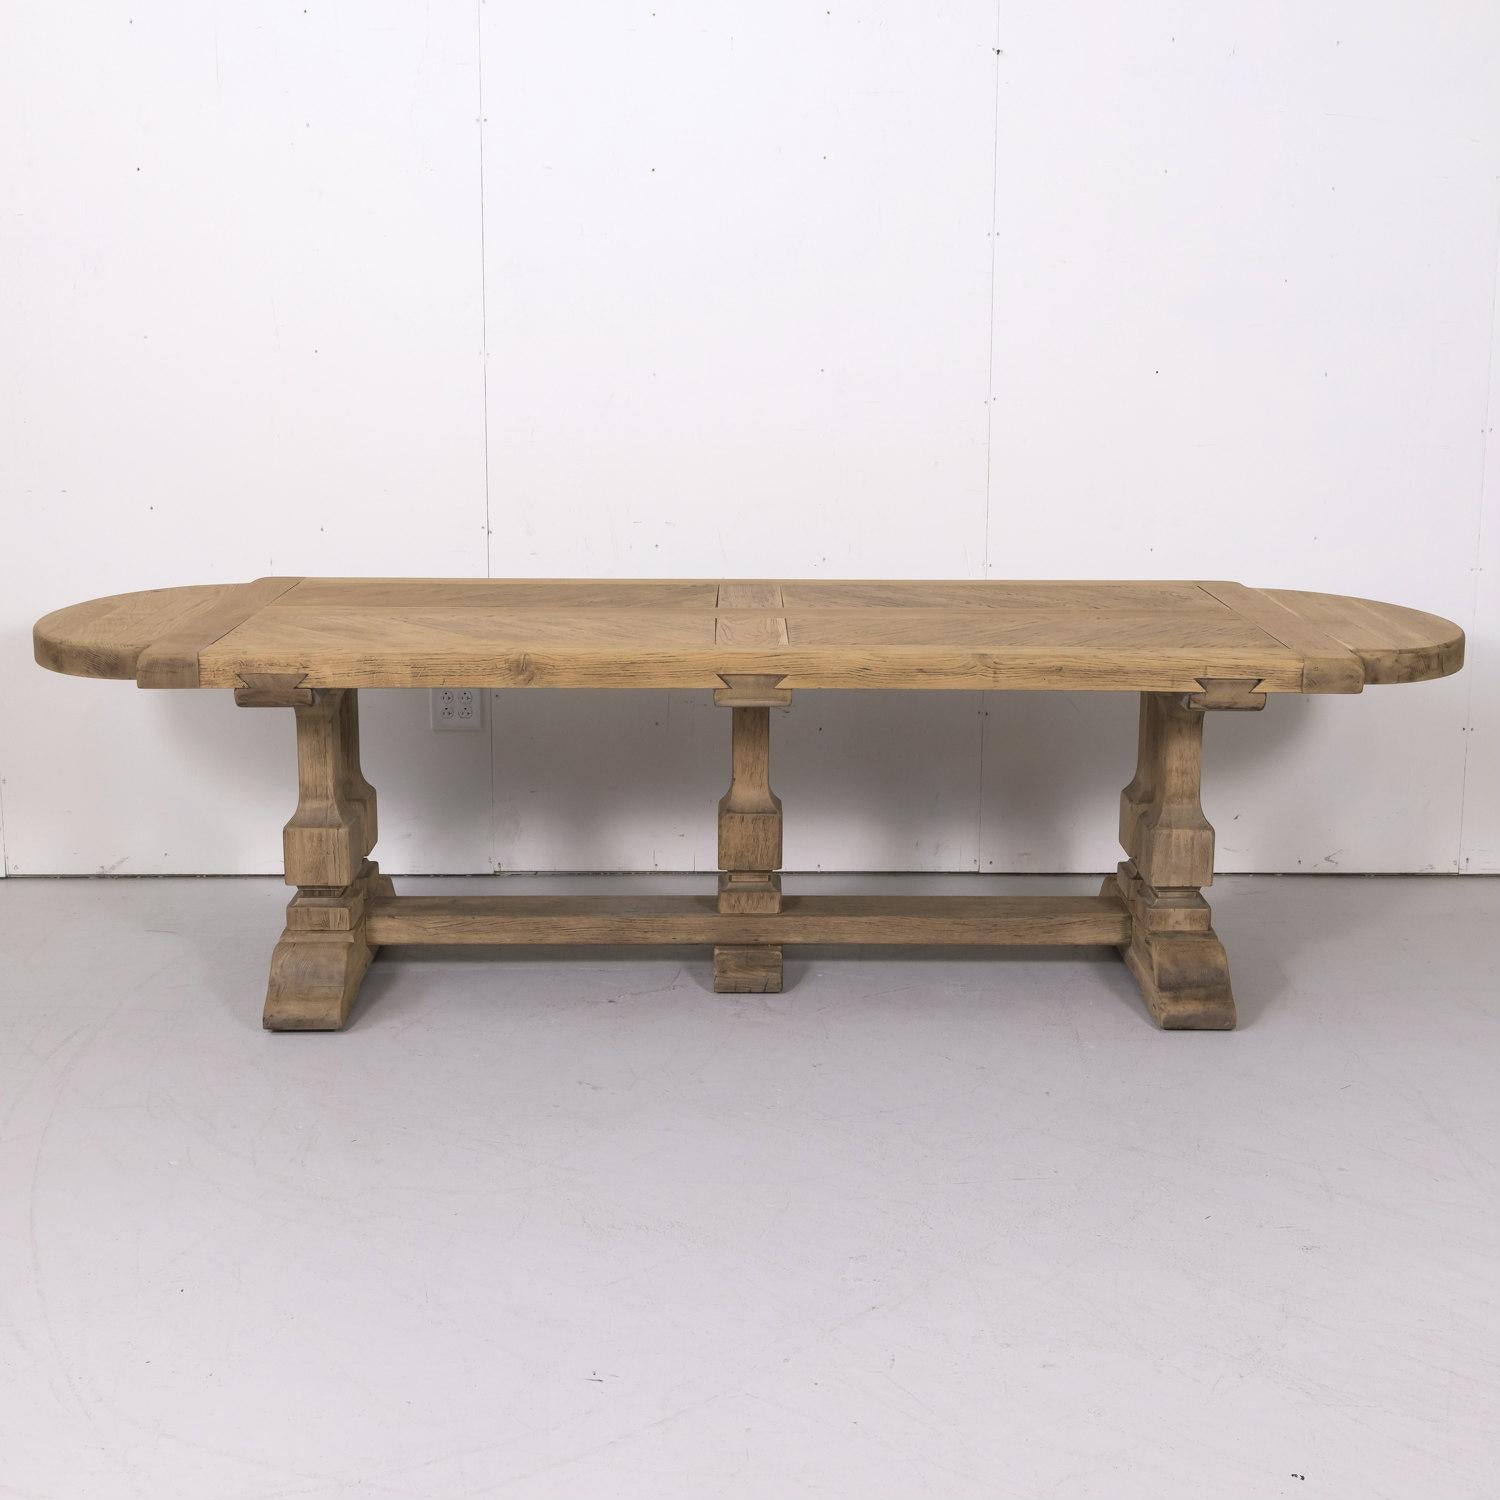 Large antique French monastery trestle table handcrafted by talented artisans near Caen, in the heart of Normandy, of old growth French oak bleached or washed to a natural finish and hand waxed to a beautiful patina, circa 1920s. Having a 2.75